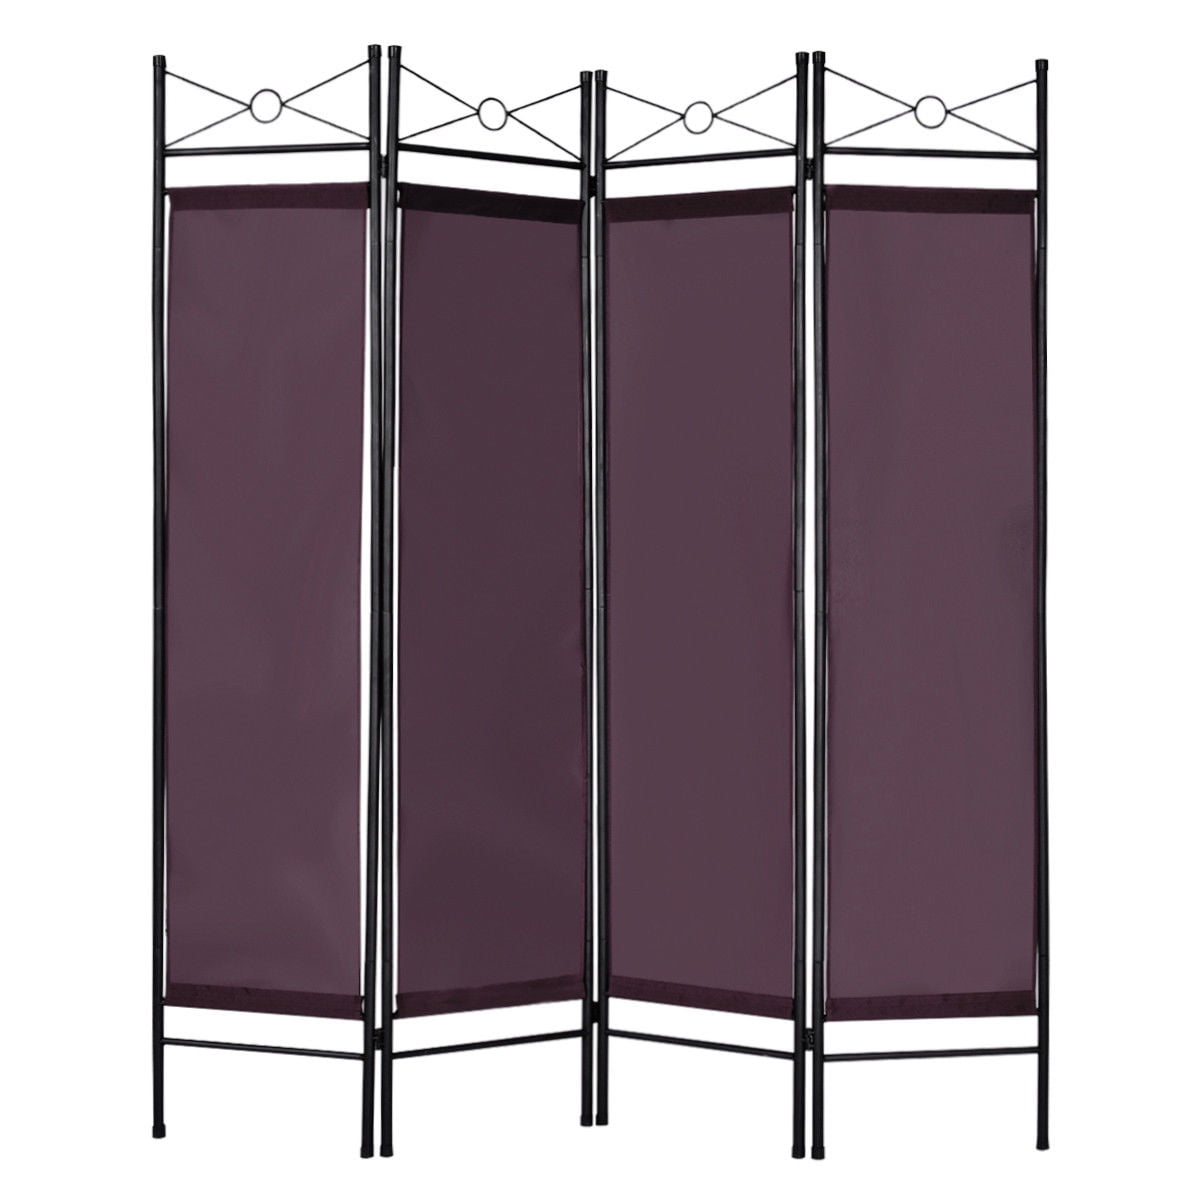 4 Panel Screen Room Divider Fabric Metal frame Folding Partition Privacy 